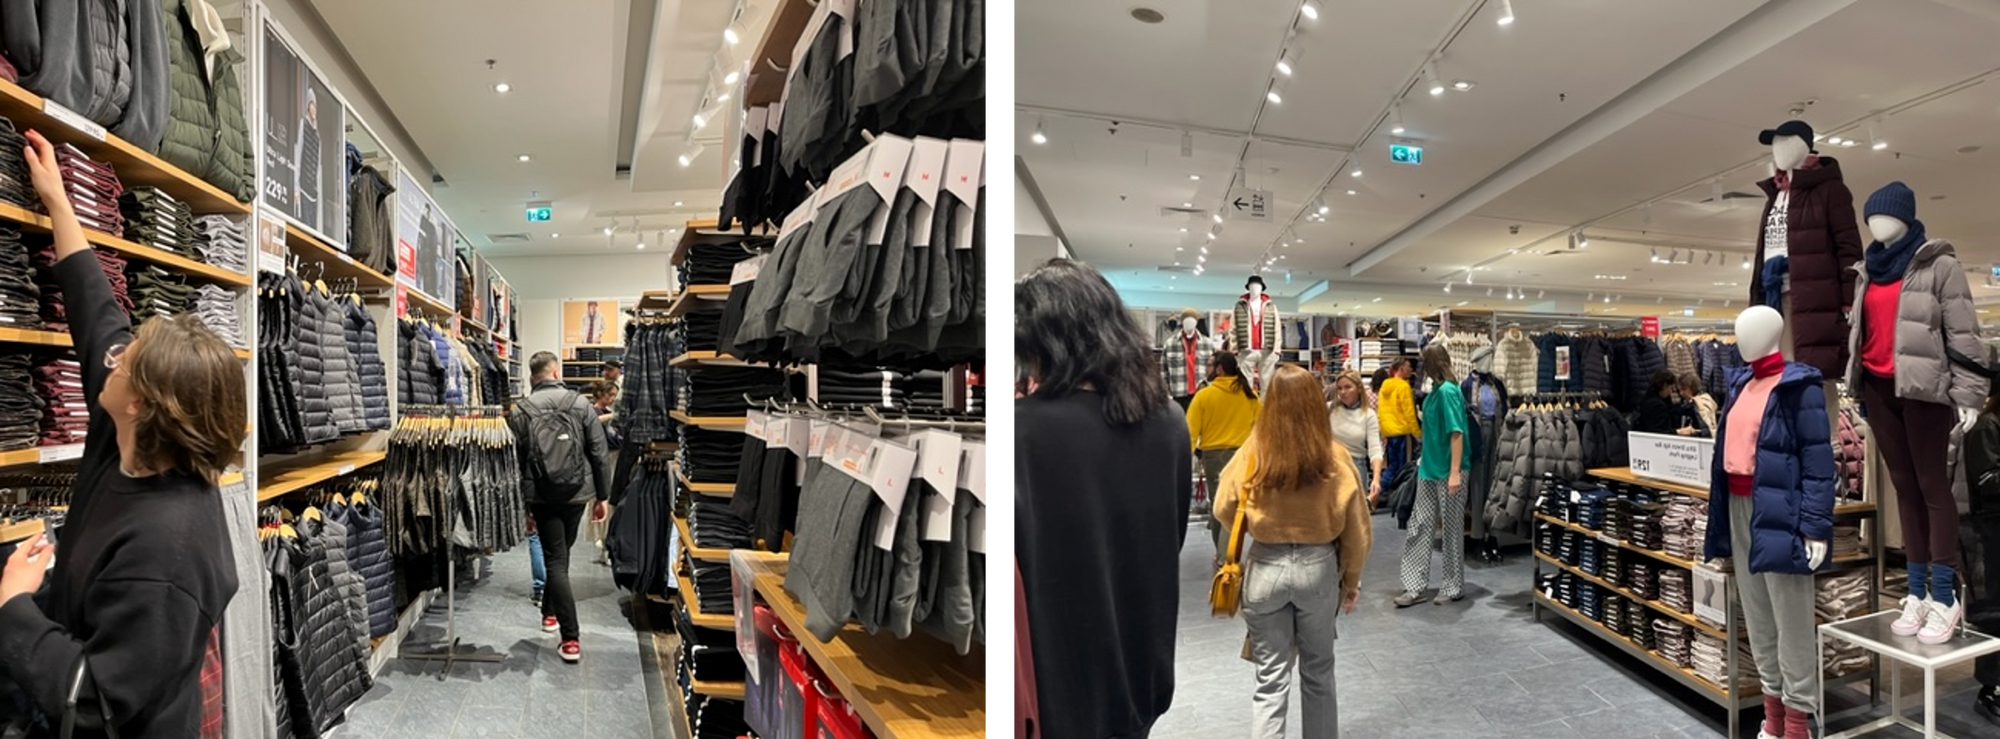 Shoppers in the new Uniqlo in Warsaw